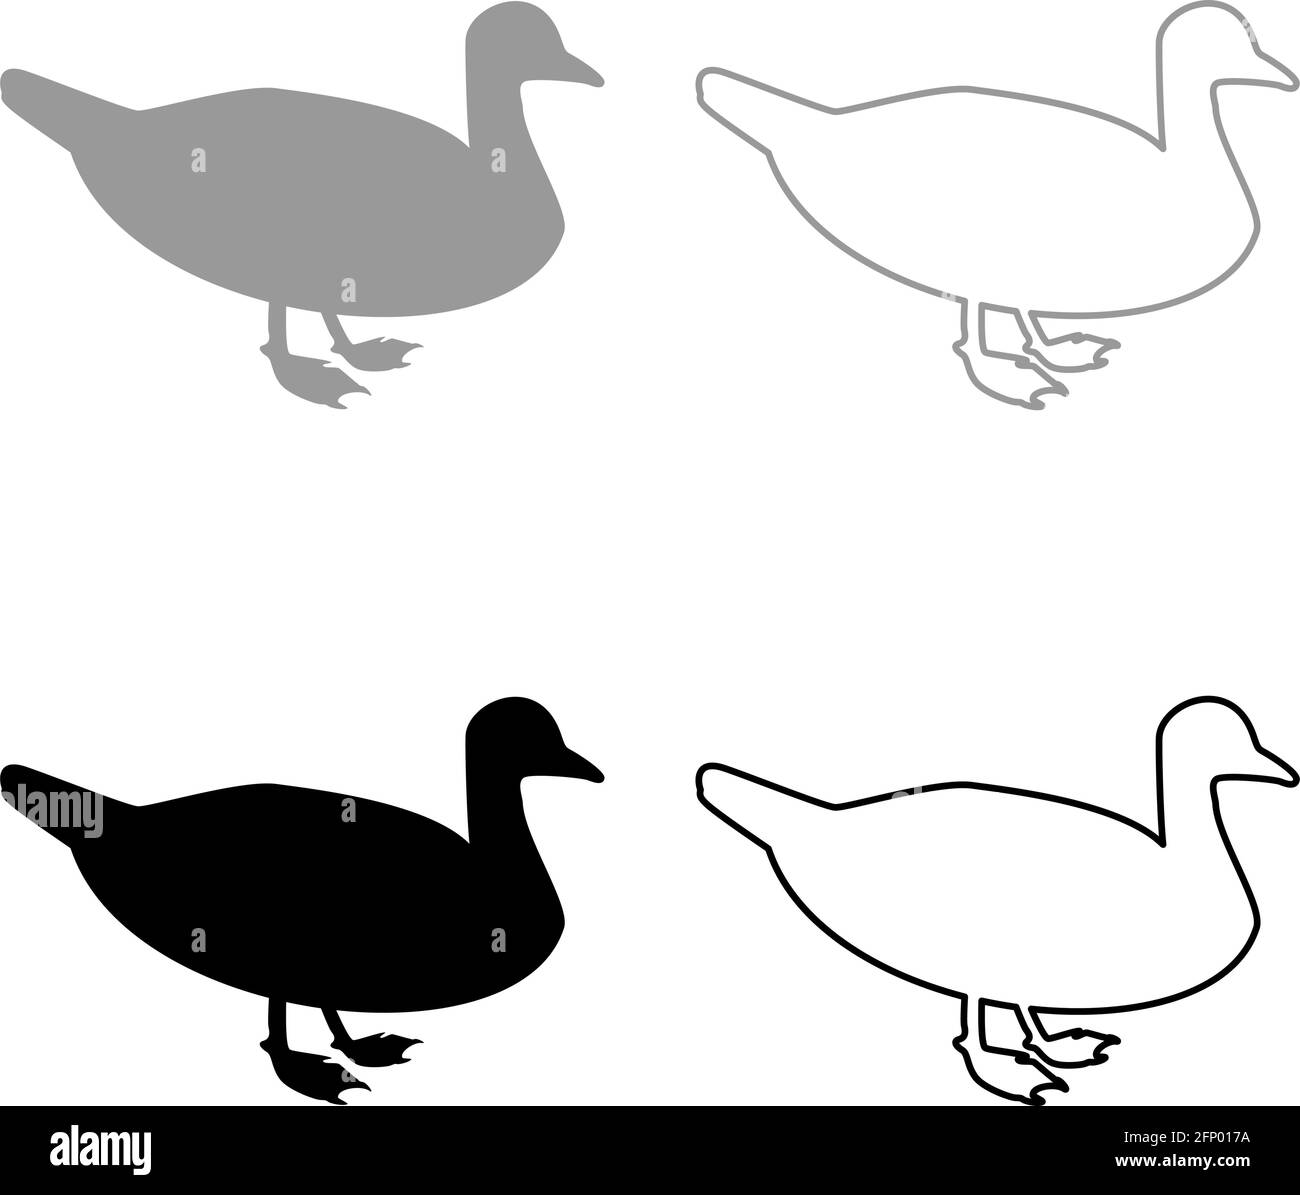 Duck Male mallard Bird Waterbird Waterfowl Poultry Fowl Canard silhouette grey black color vector illustration solid outline style simple image Stock Vector